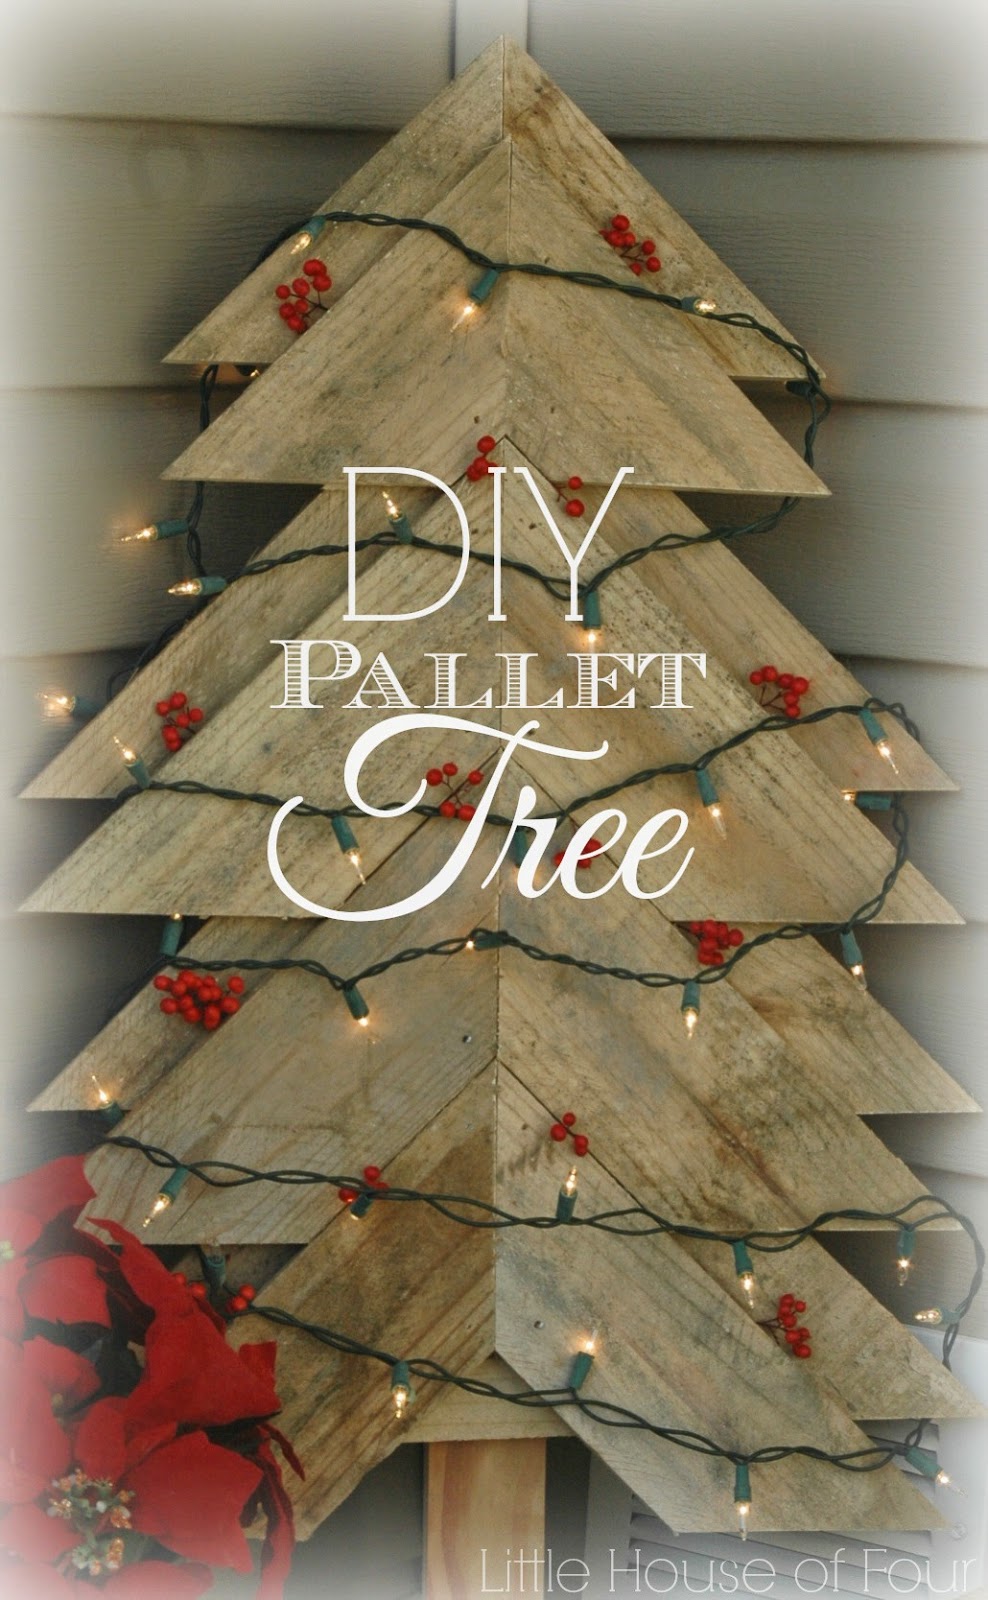 Pallet tree with lights